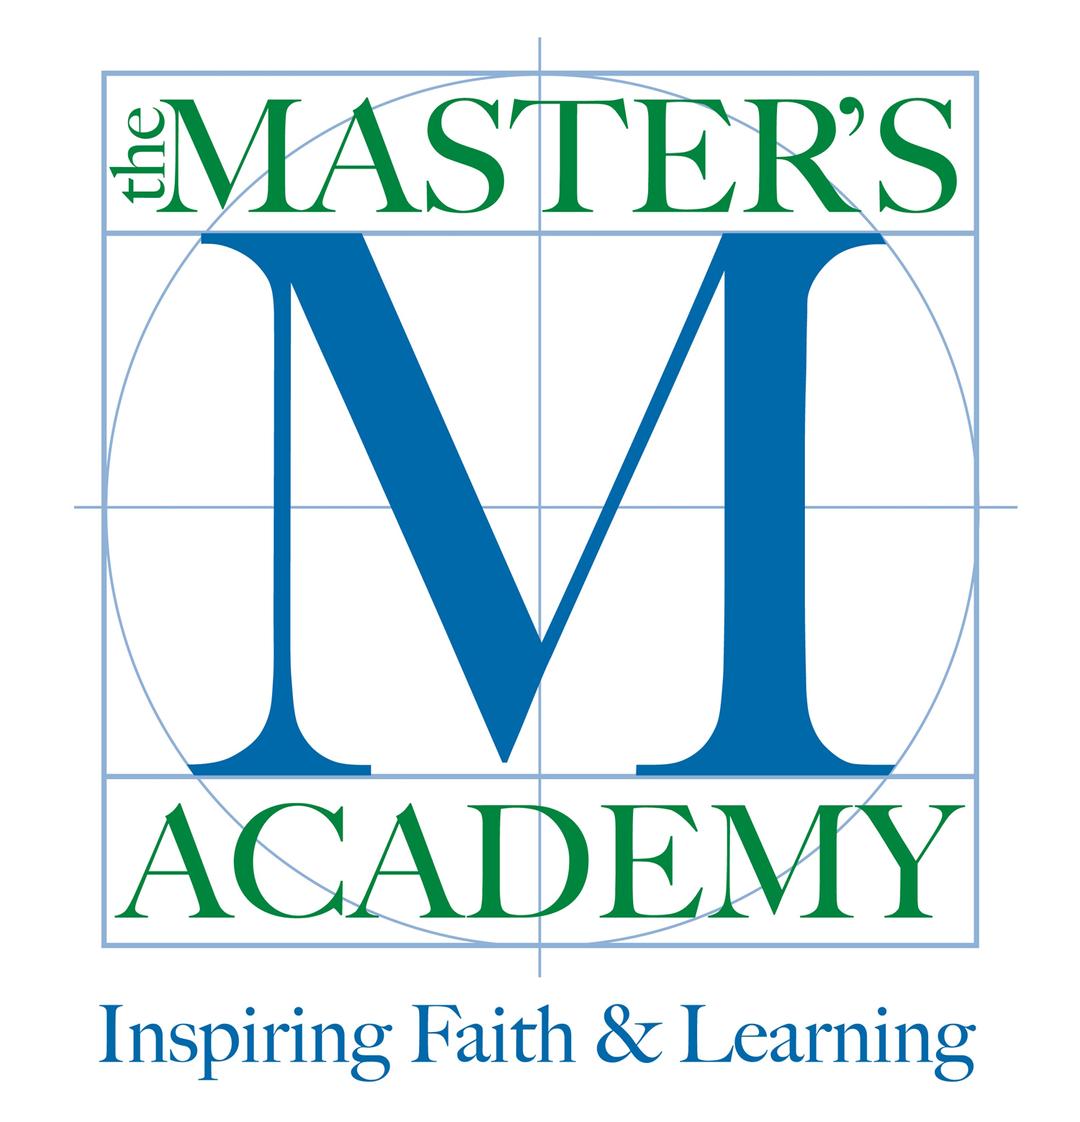 The Masters Academy Photo #1